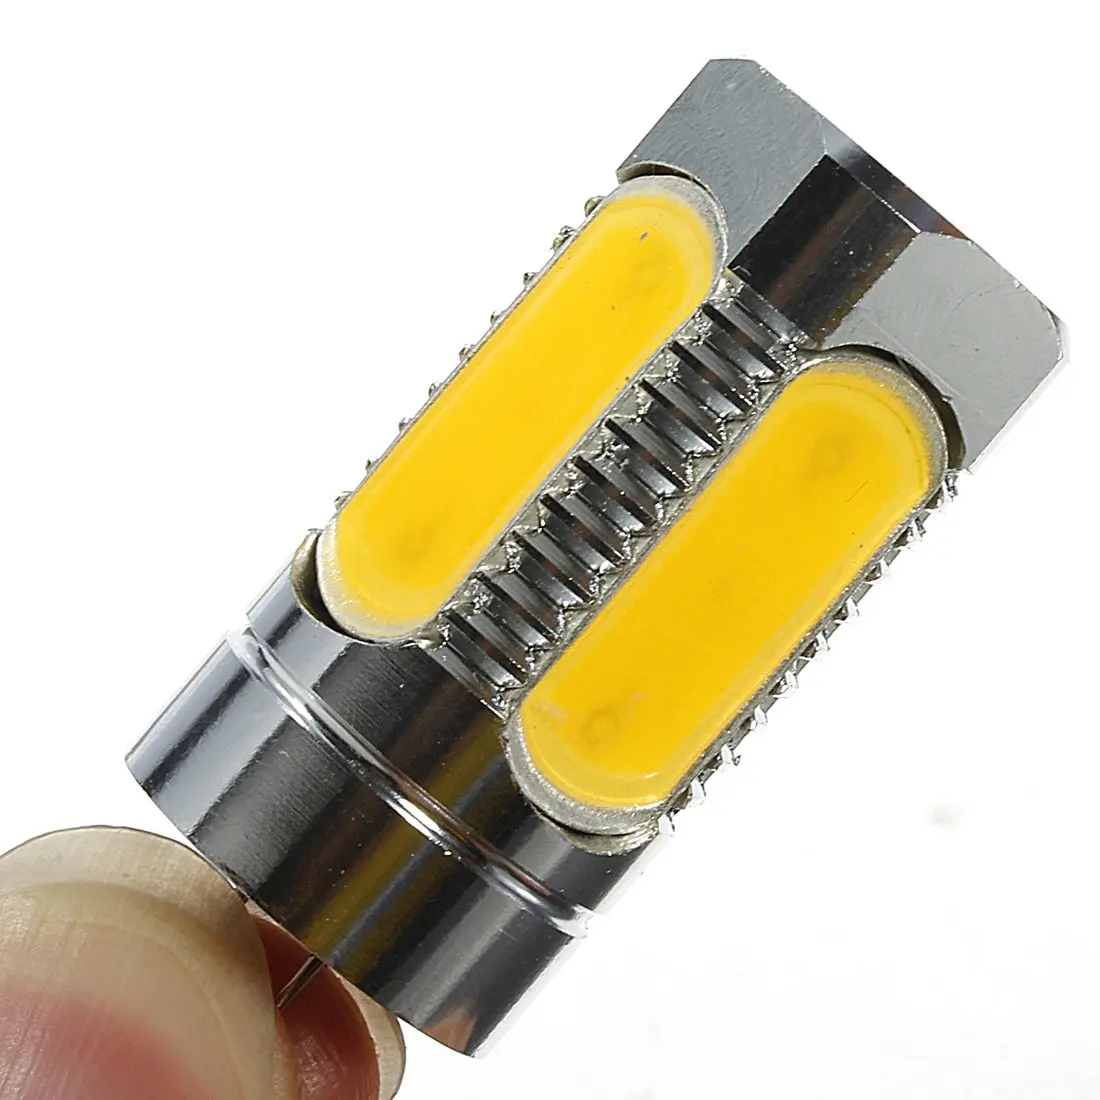 Promotion! 10 pieces G4 COB 5W LED Energy Saving Lamp Bulb - Warmweiss